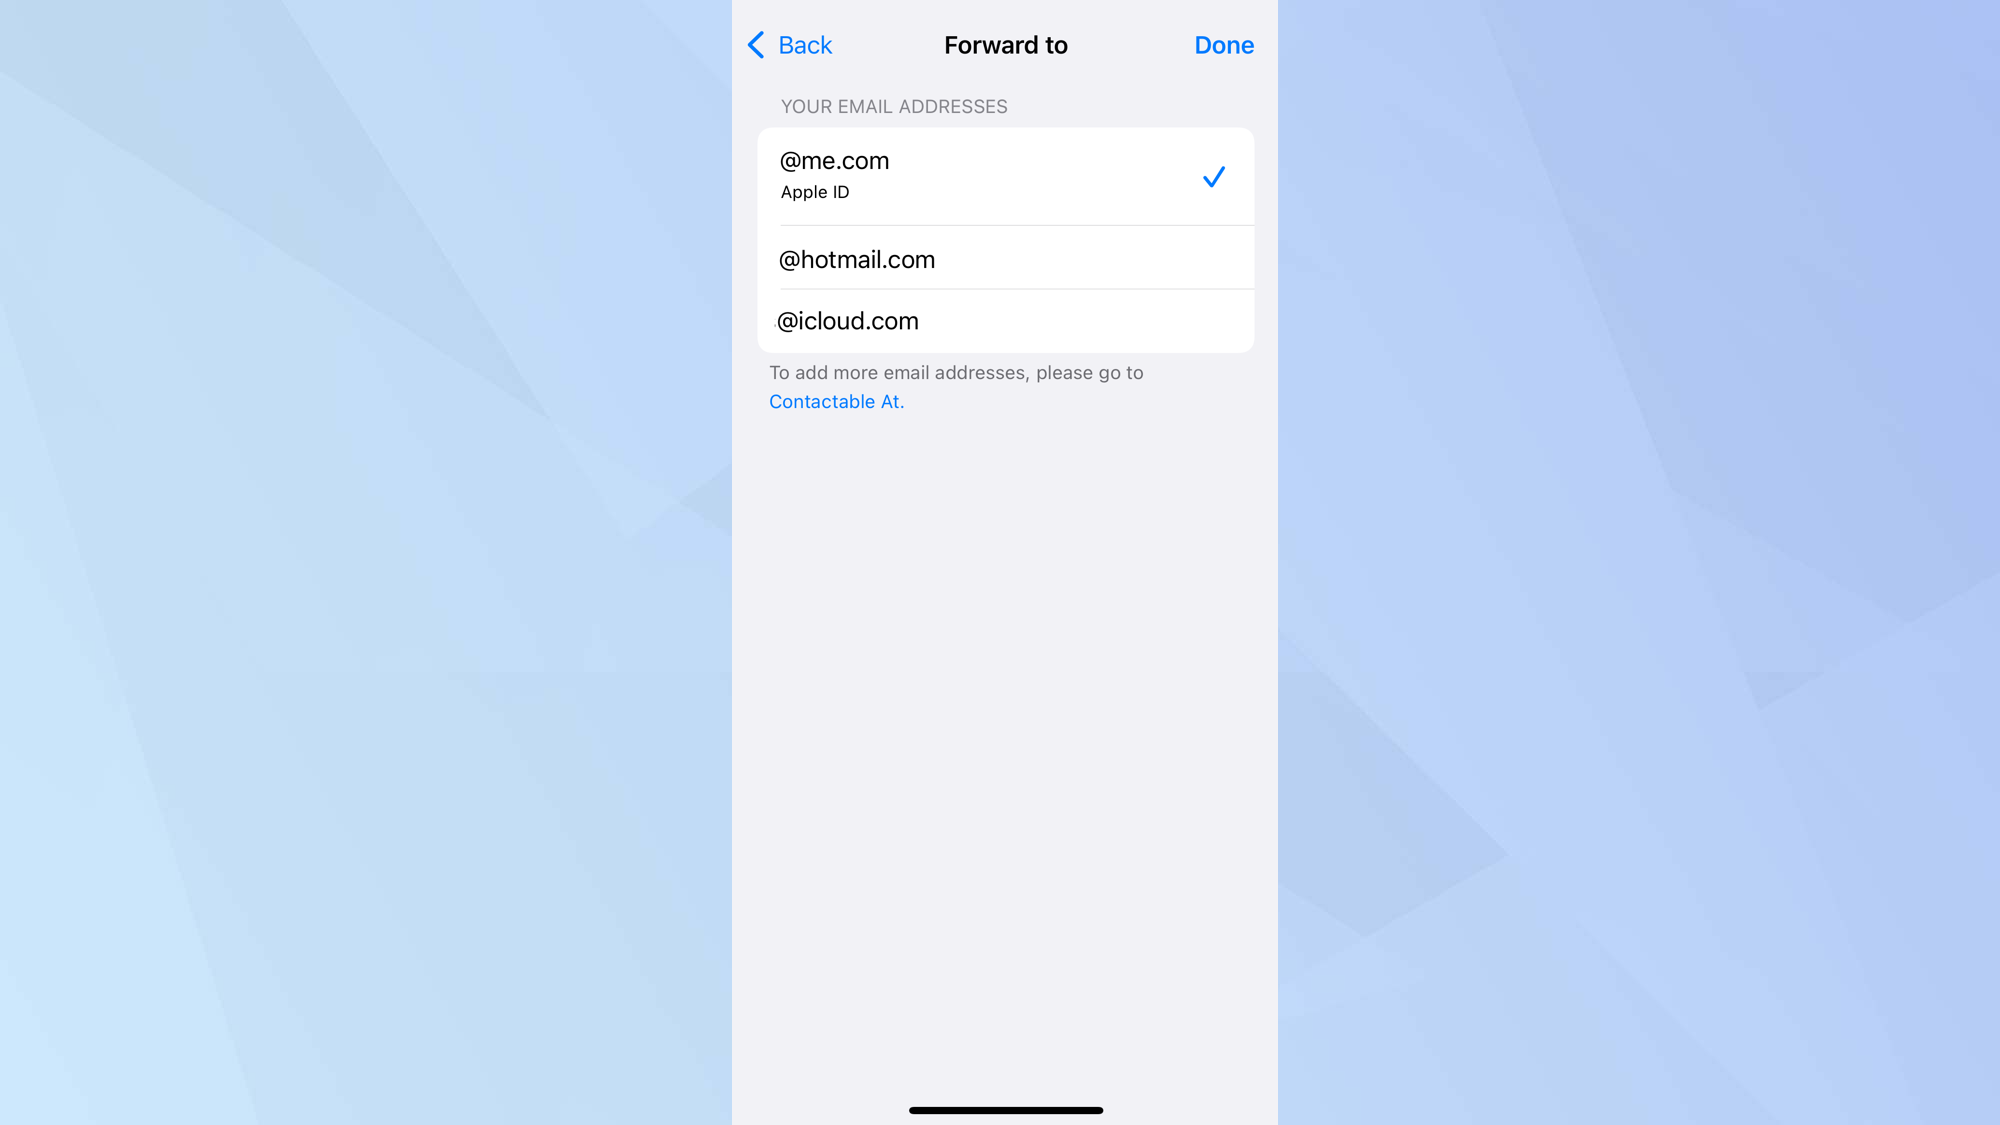 iOS iCloud app with forward to options for email in view